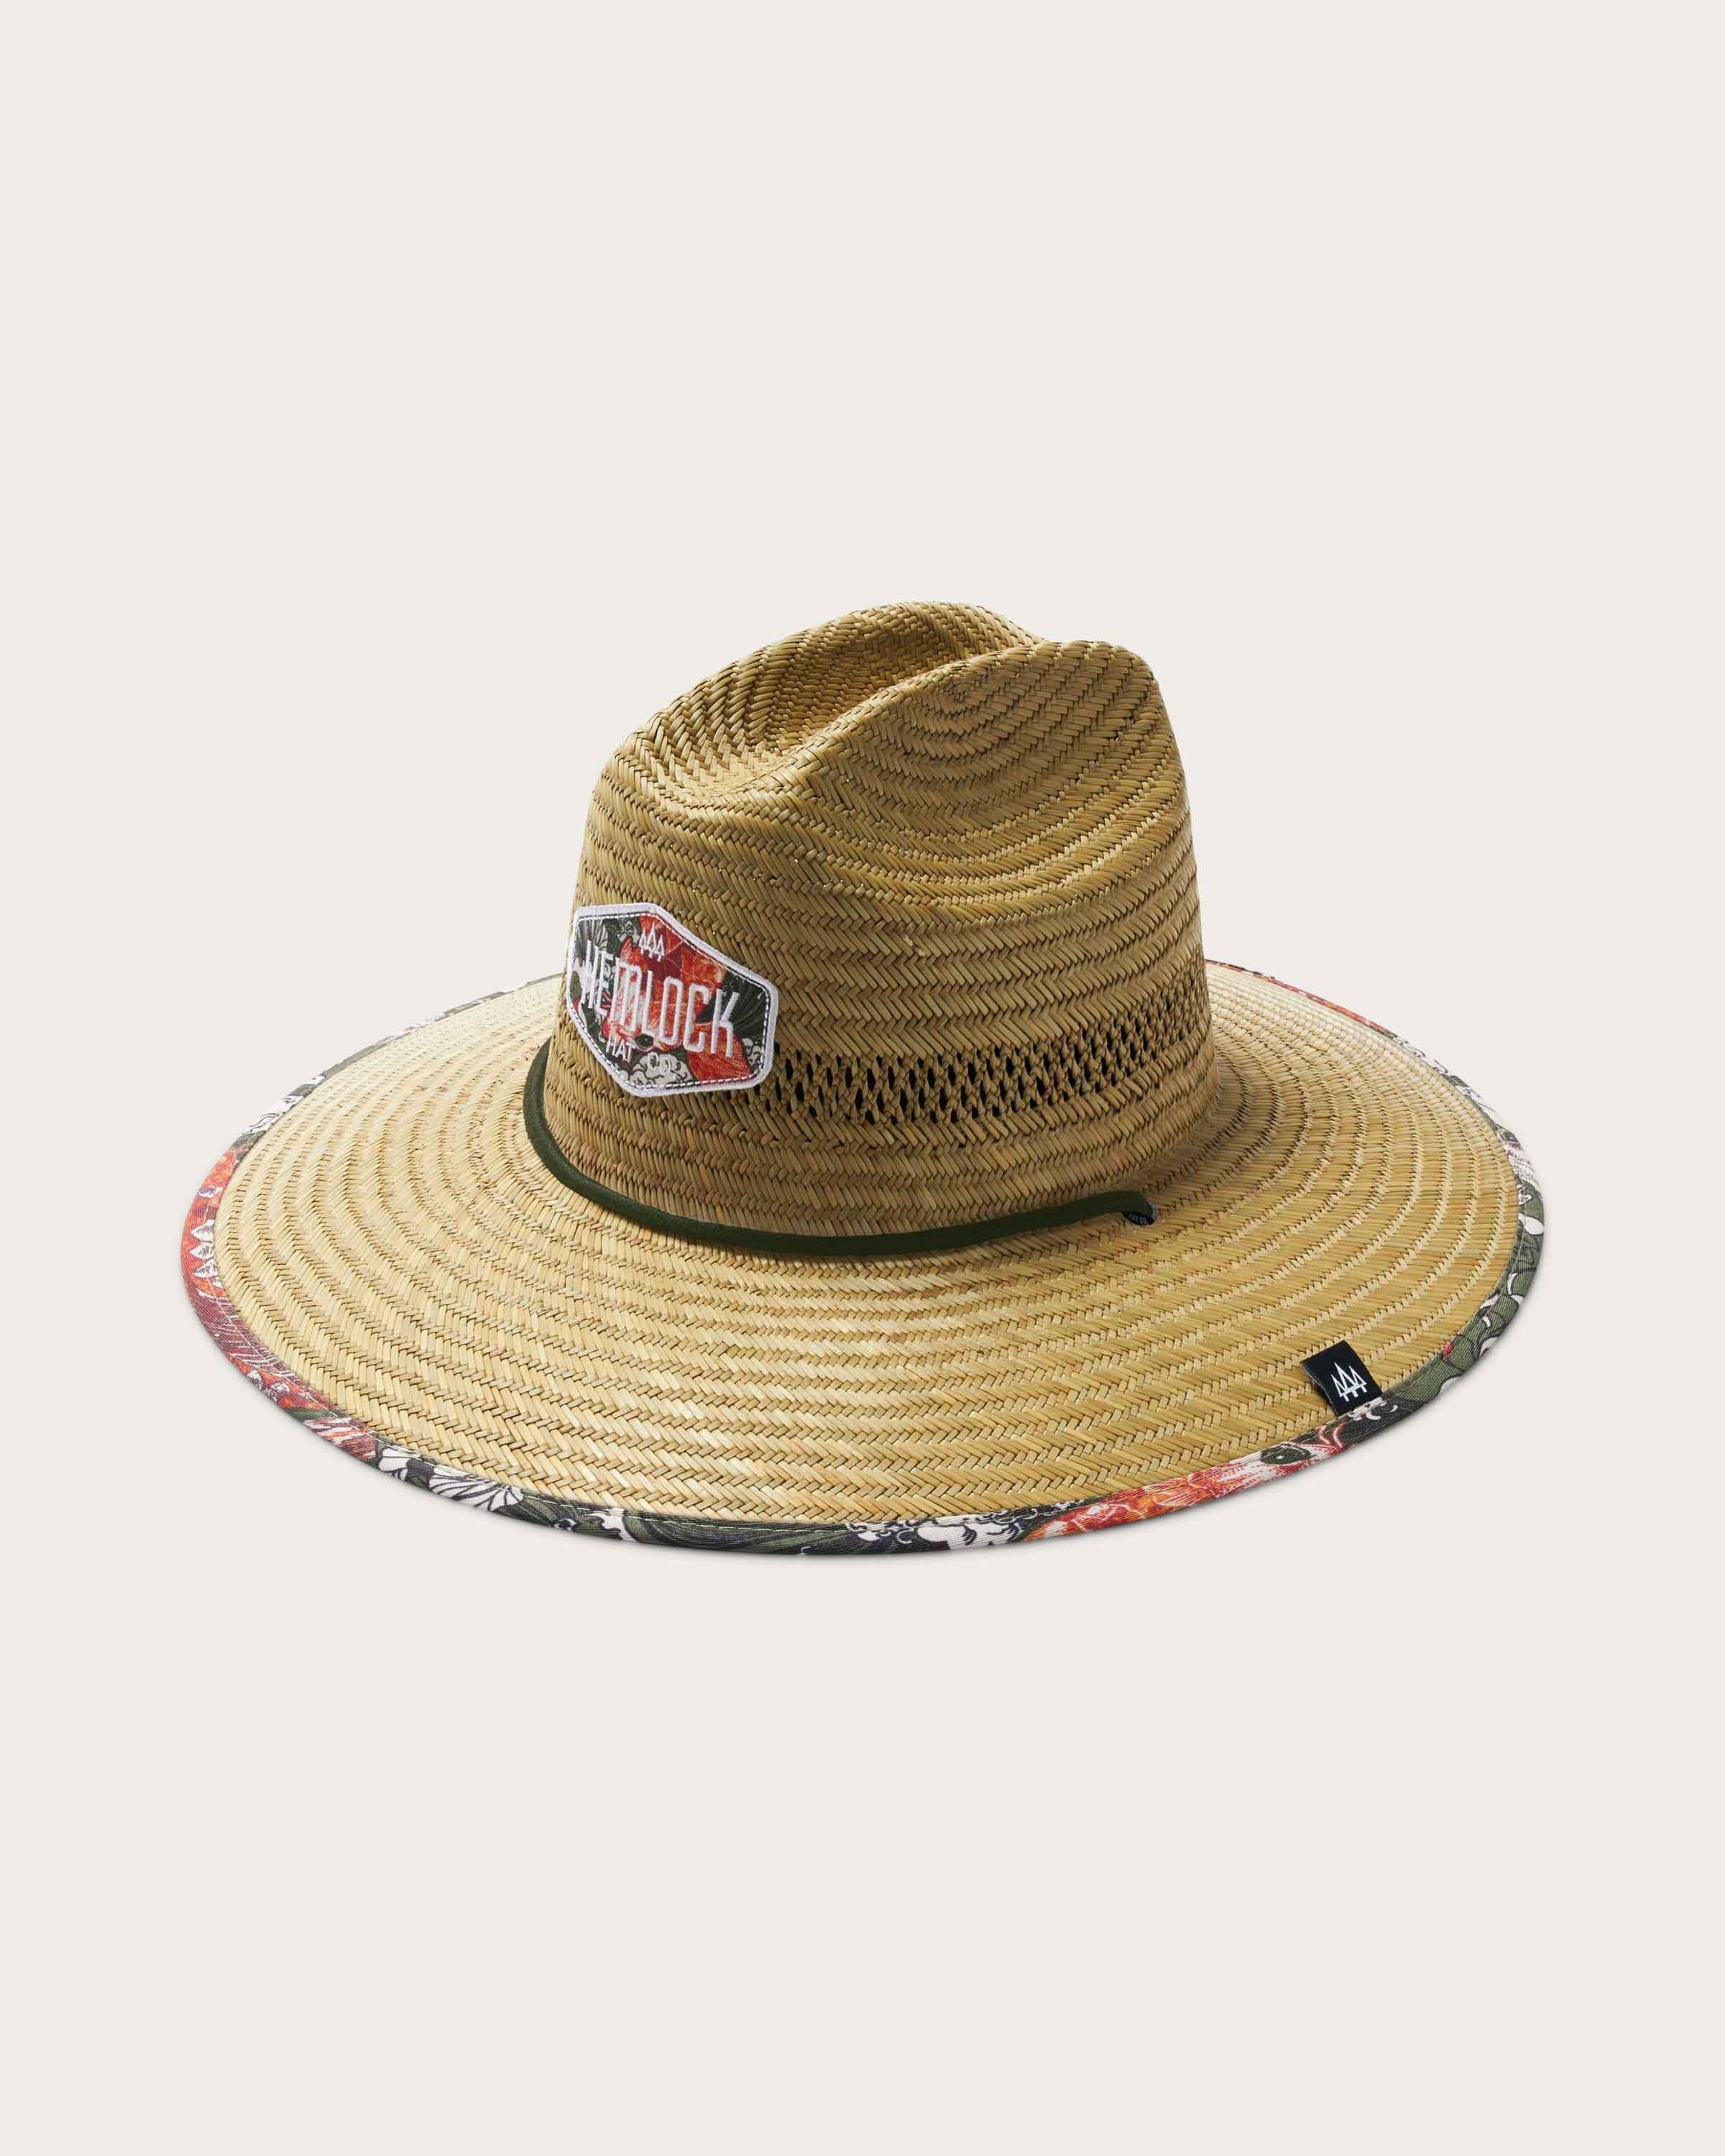 Fortune - undefined - Hemlock Hat Co. Lifeguards - Adults